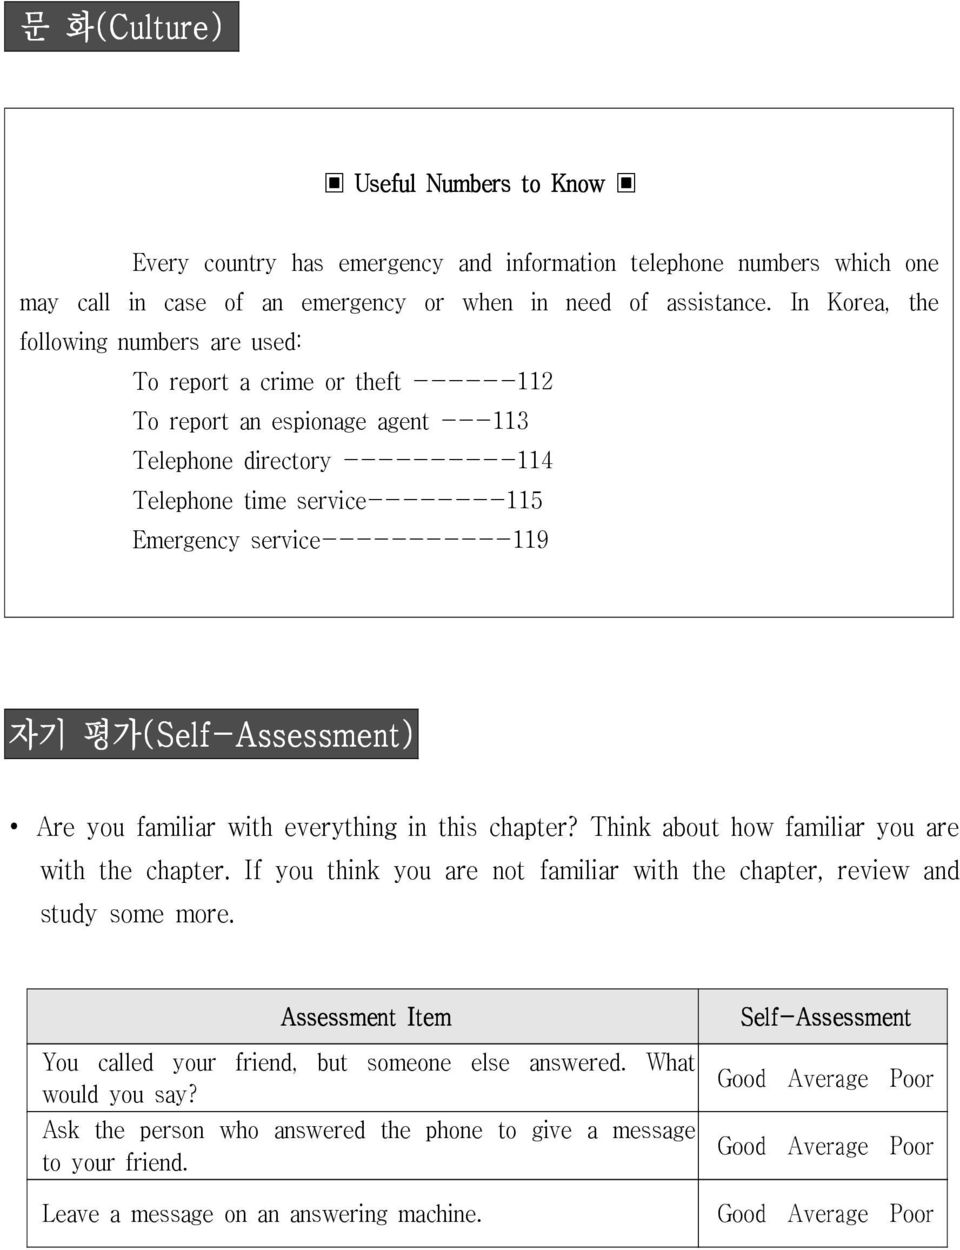 service-----------119 자기 평가(Self-Assessment) Are you familiar with everything in this chapter? Think about how familiar you are with the chapter.